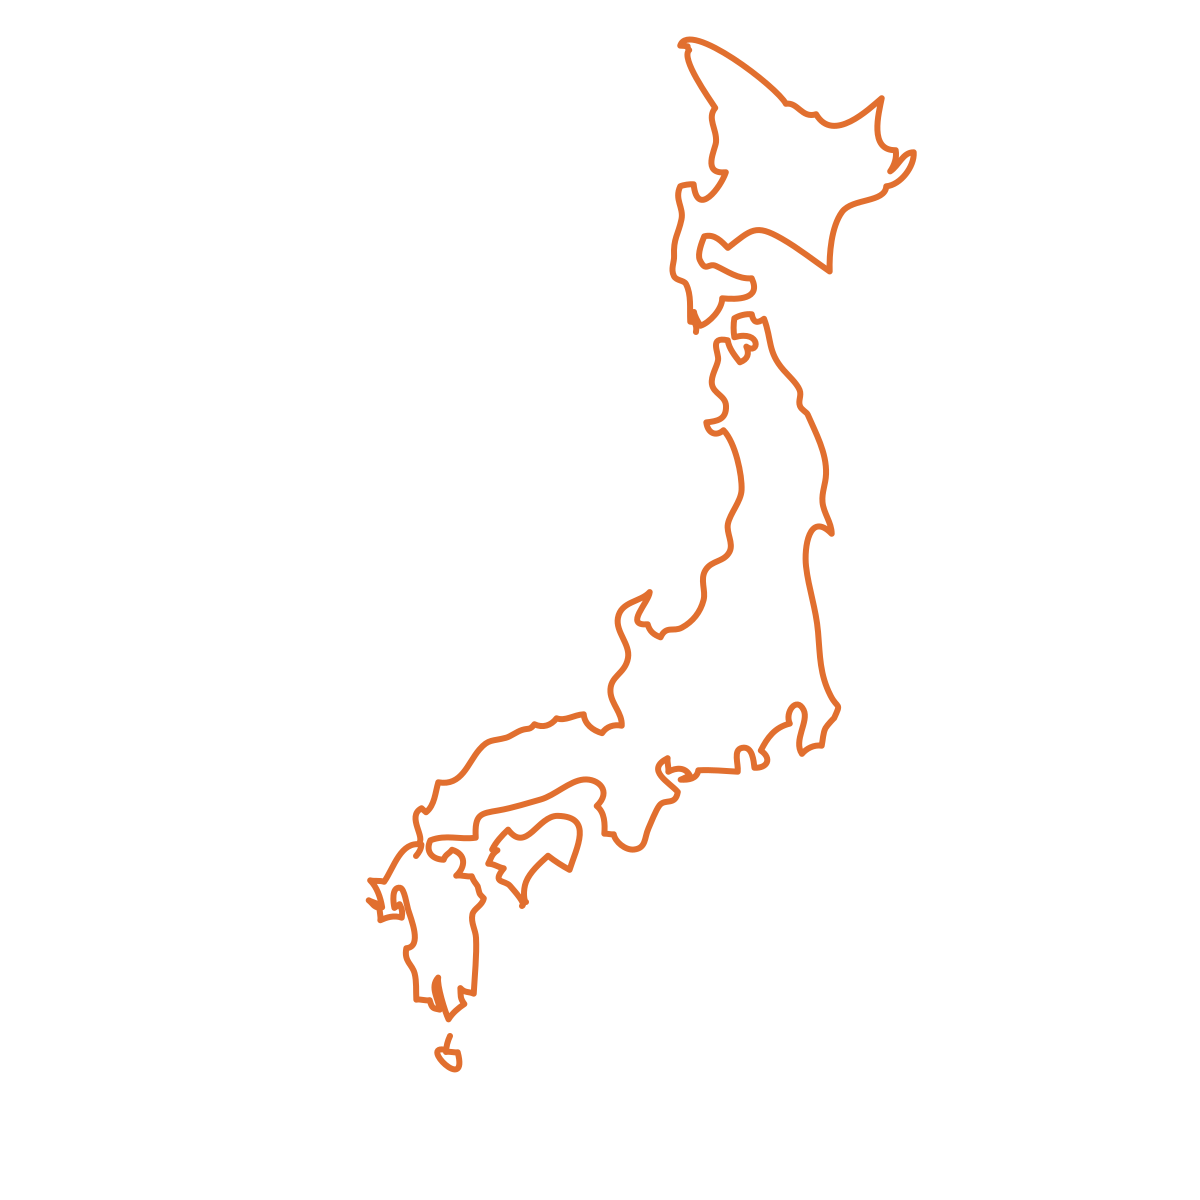 Map outline of Japan